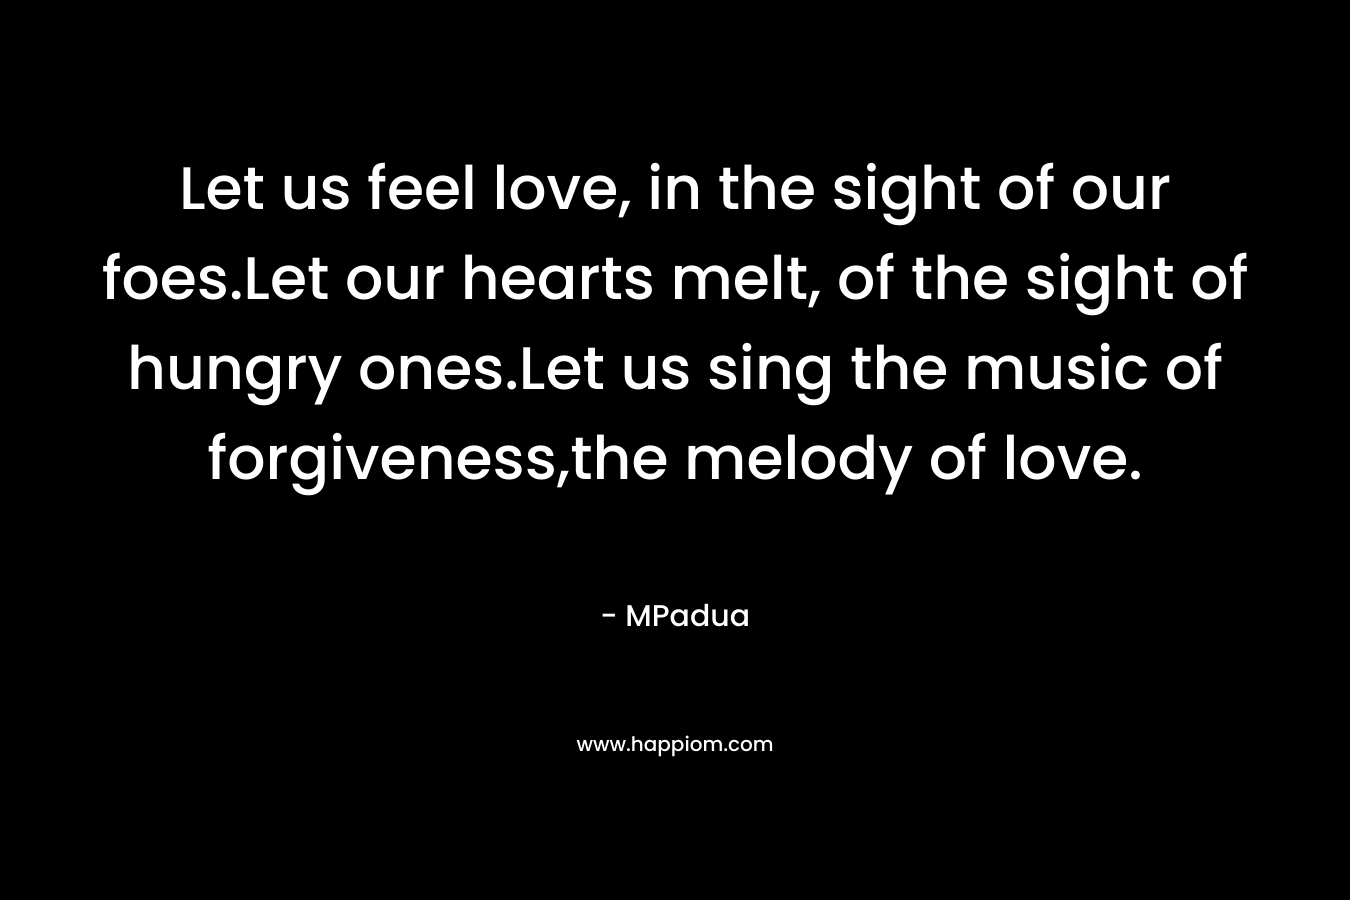 Let us feel love, in the sight of our foes.Let our hearts melt, of the sight of hungry ones.Let us sing the music of forgiveness,the melody of love.